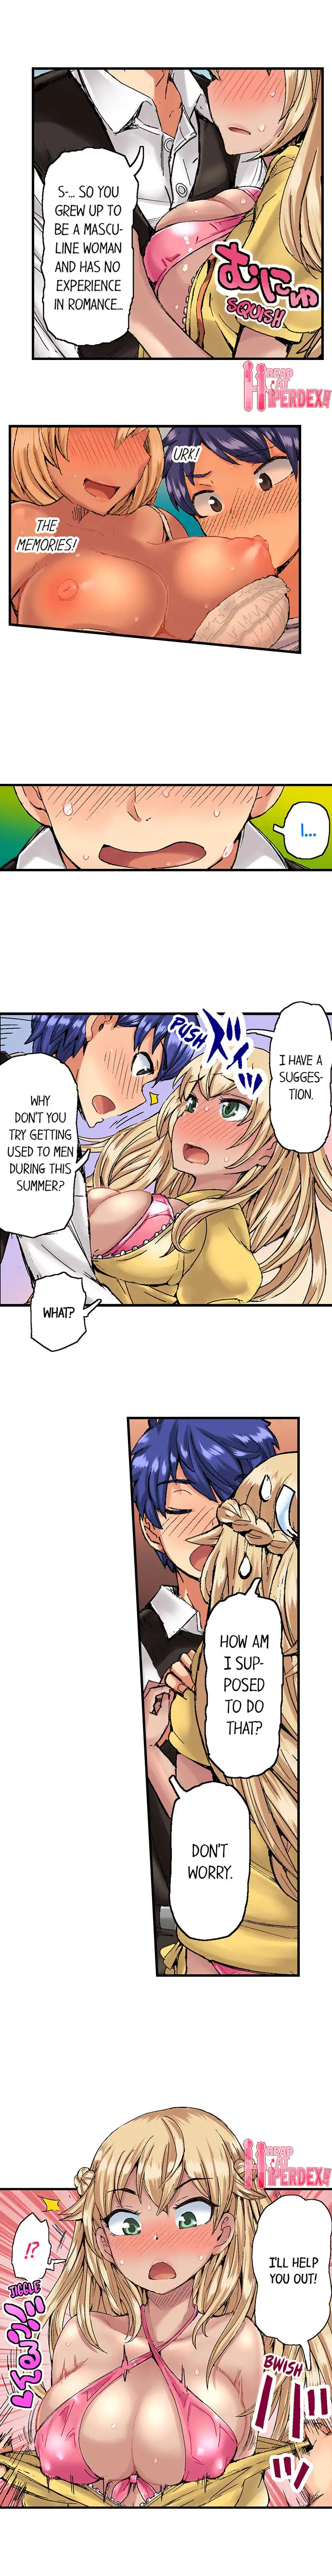 Taking a Hot Tanned Chick’s Virginity - Chapter 3 Page 9